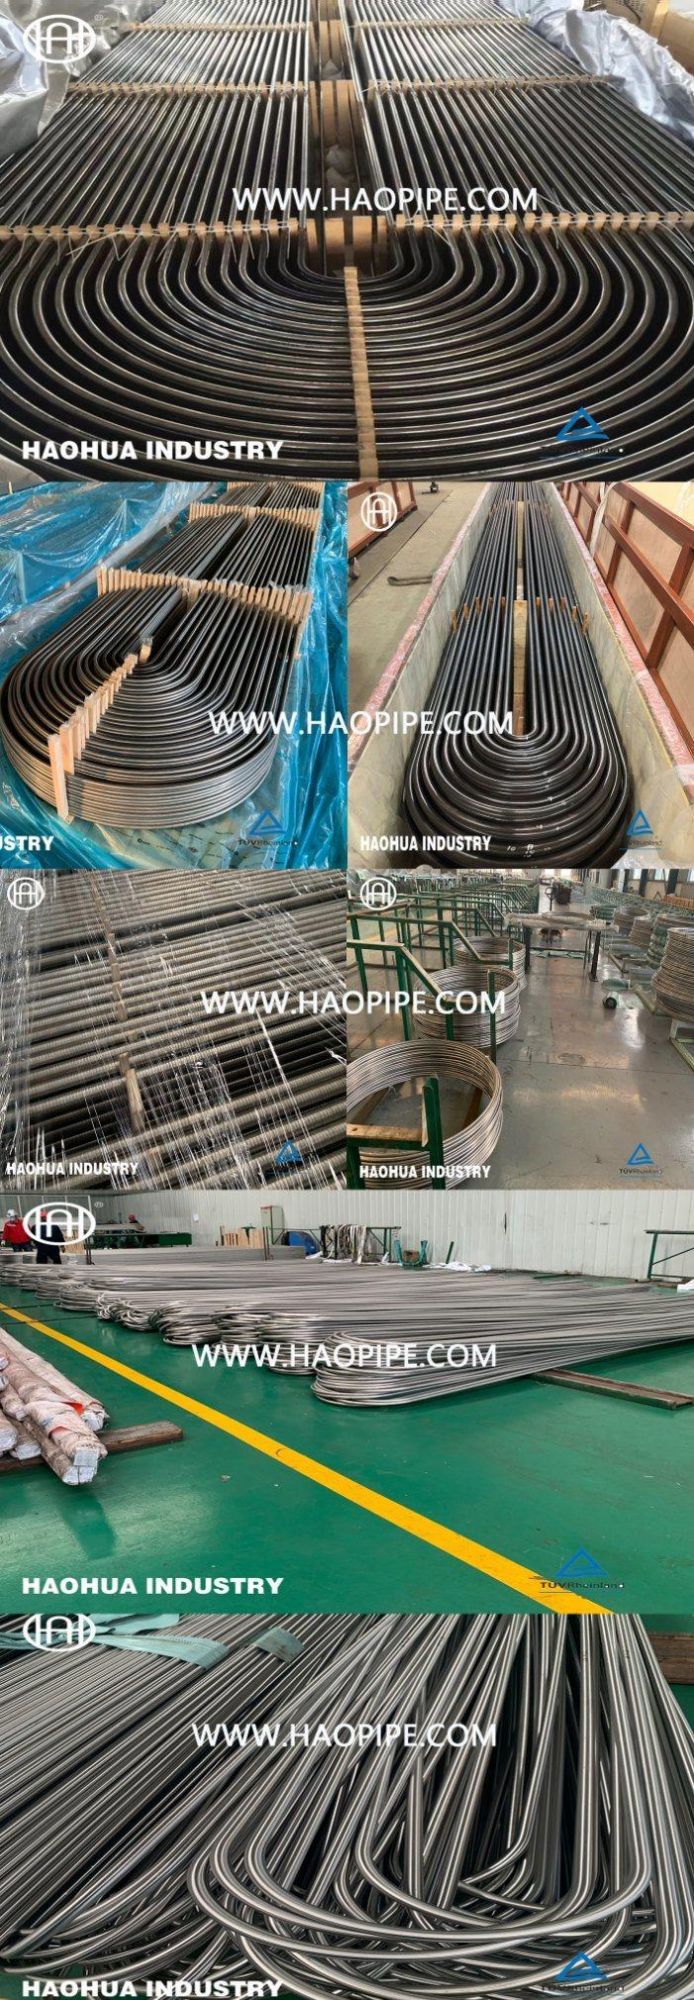 High Quality Seamless Stainless Steel Heat Exchanger Boiler U Tubes